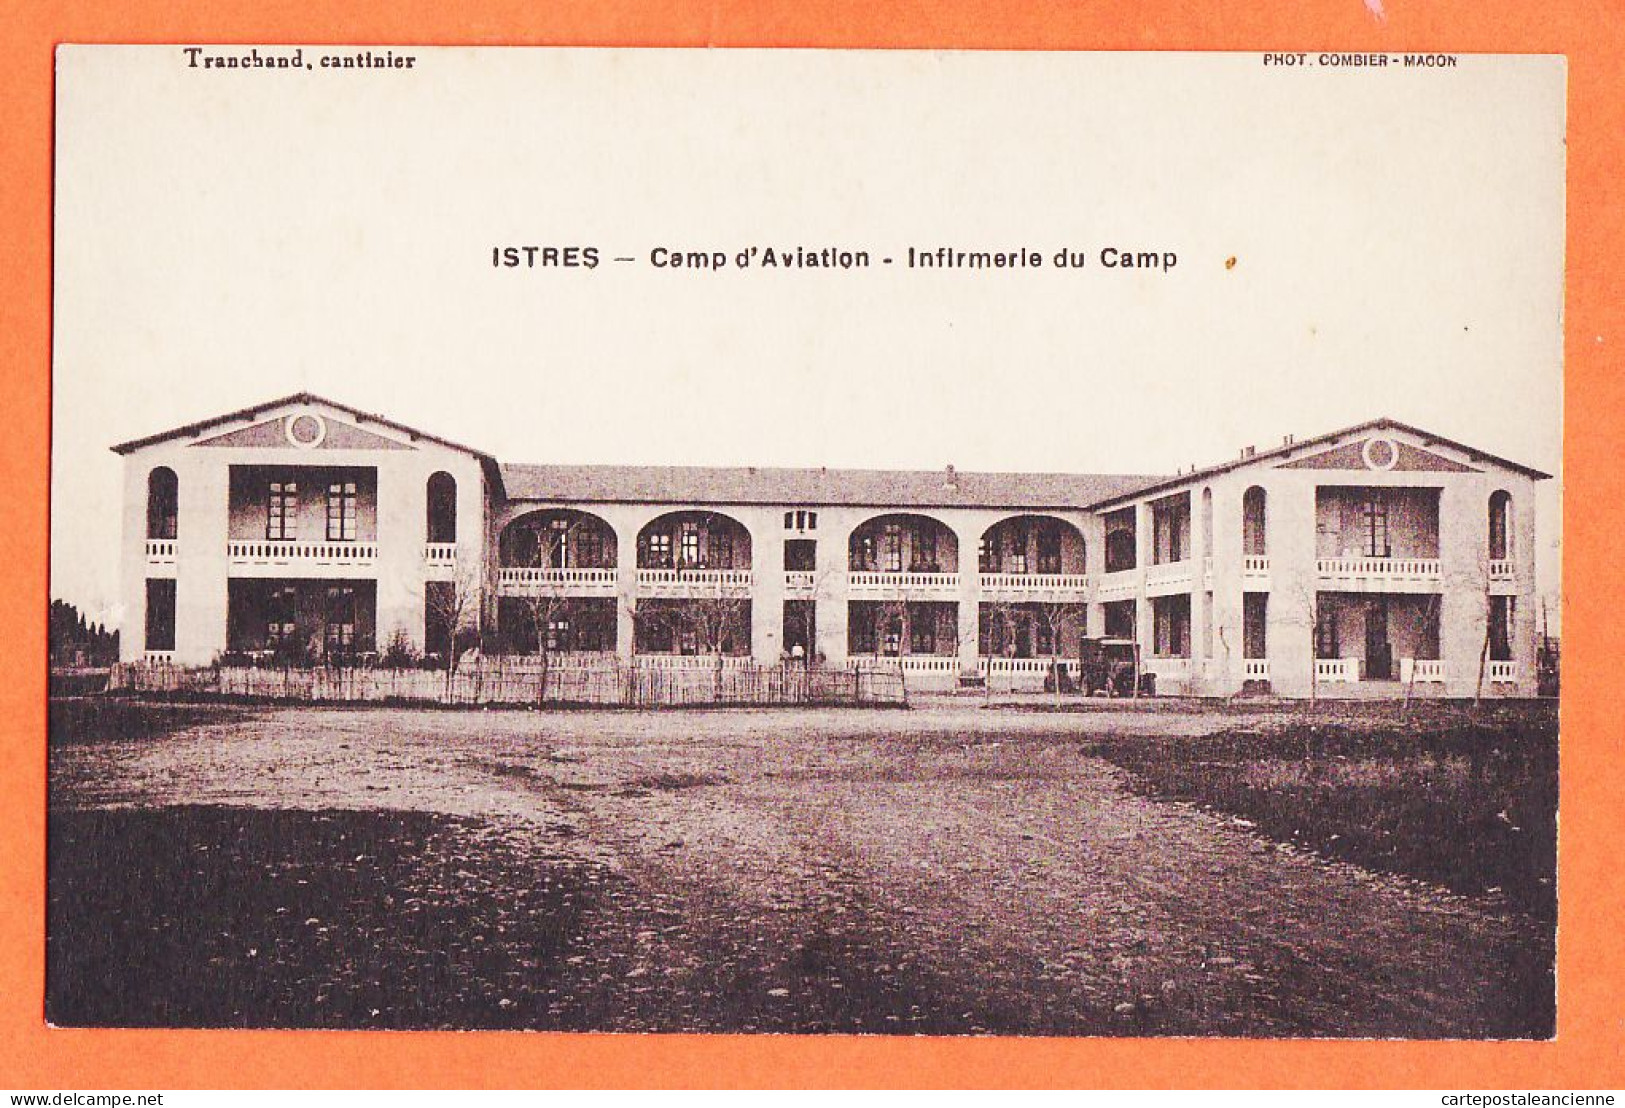 10792 ● ISTRES (13) INFIRMERIE Du Camp D' AVIATION 1920s TRANCHAND Cantinier Bouches-du-Rhone - Istres